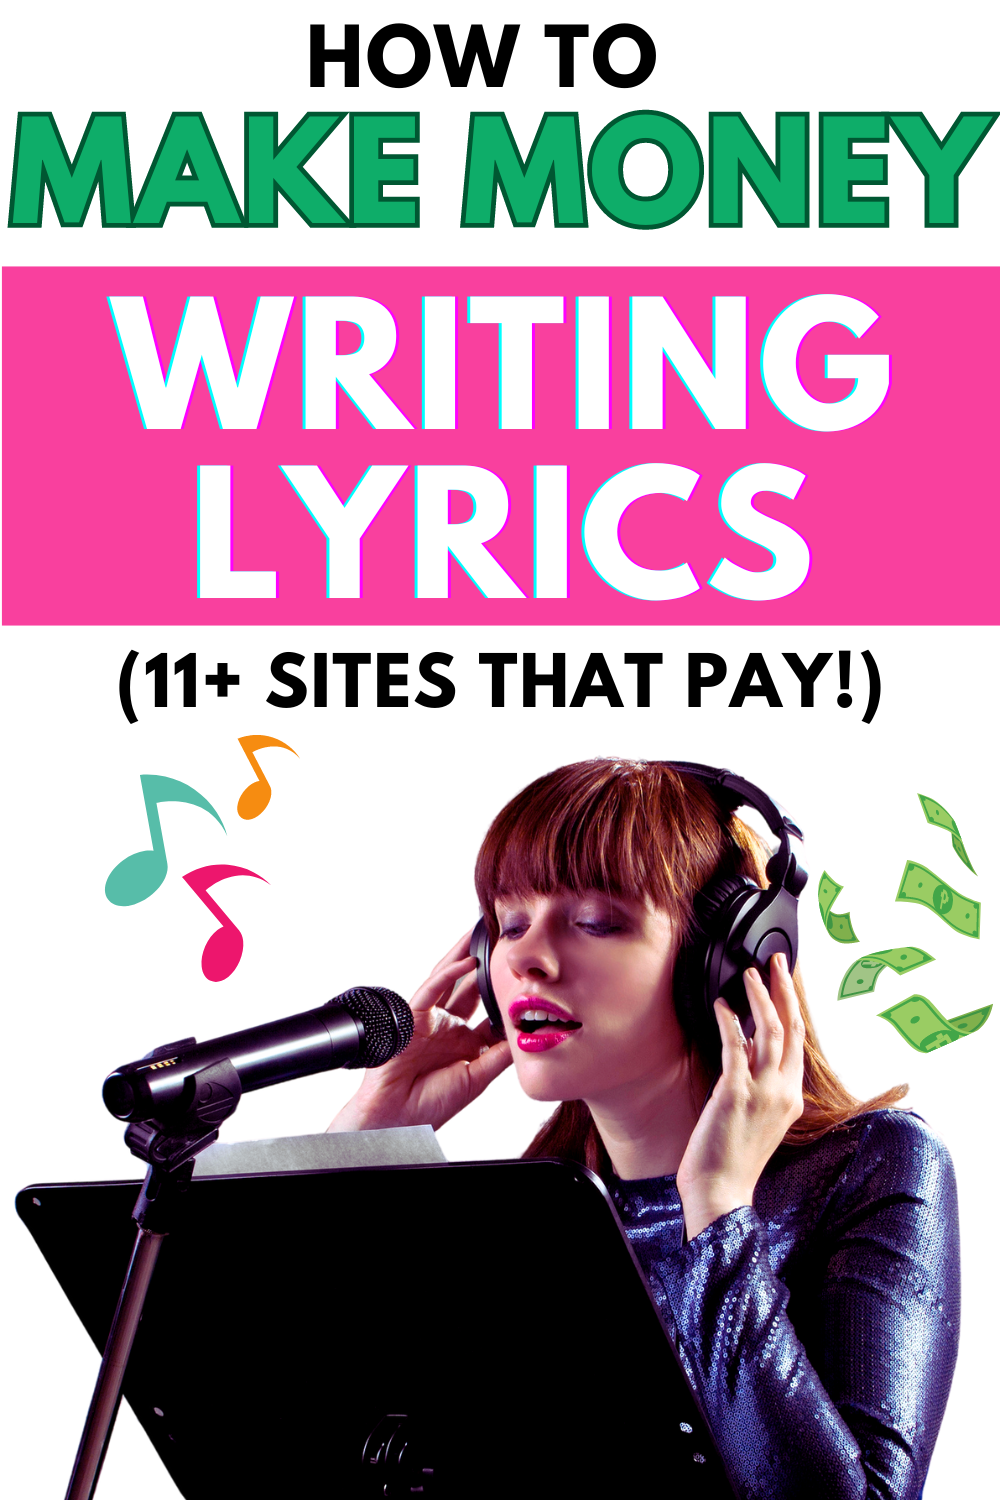 Pinterest image with large text saying How to make money writing lyrics (11+ sites that pay). Below the text is an image of a female singer wearing headphones and singing into a microphone. Around her are music notes and floating cash notes.